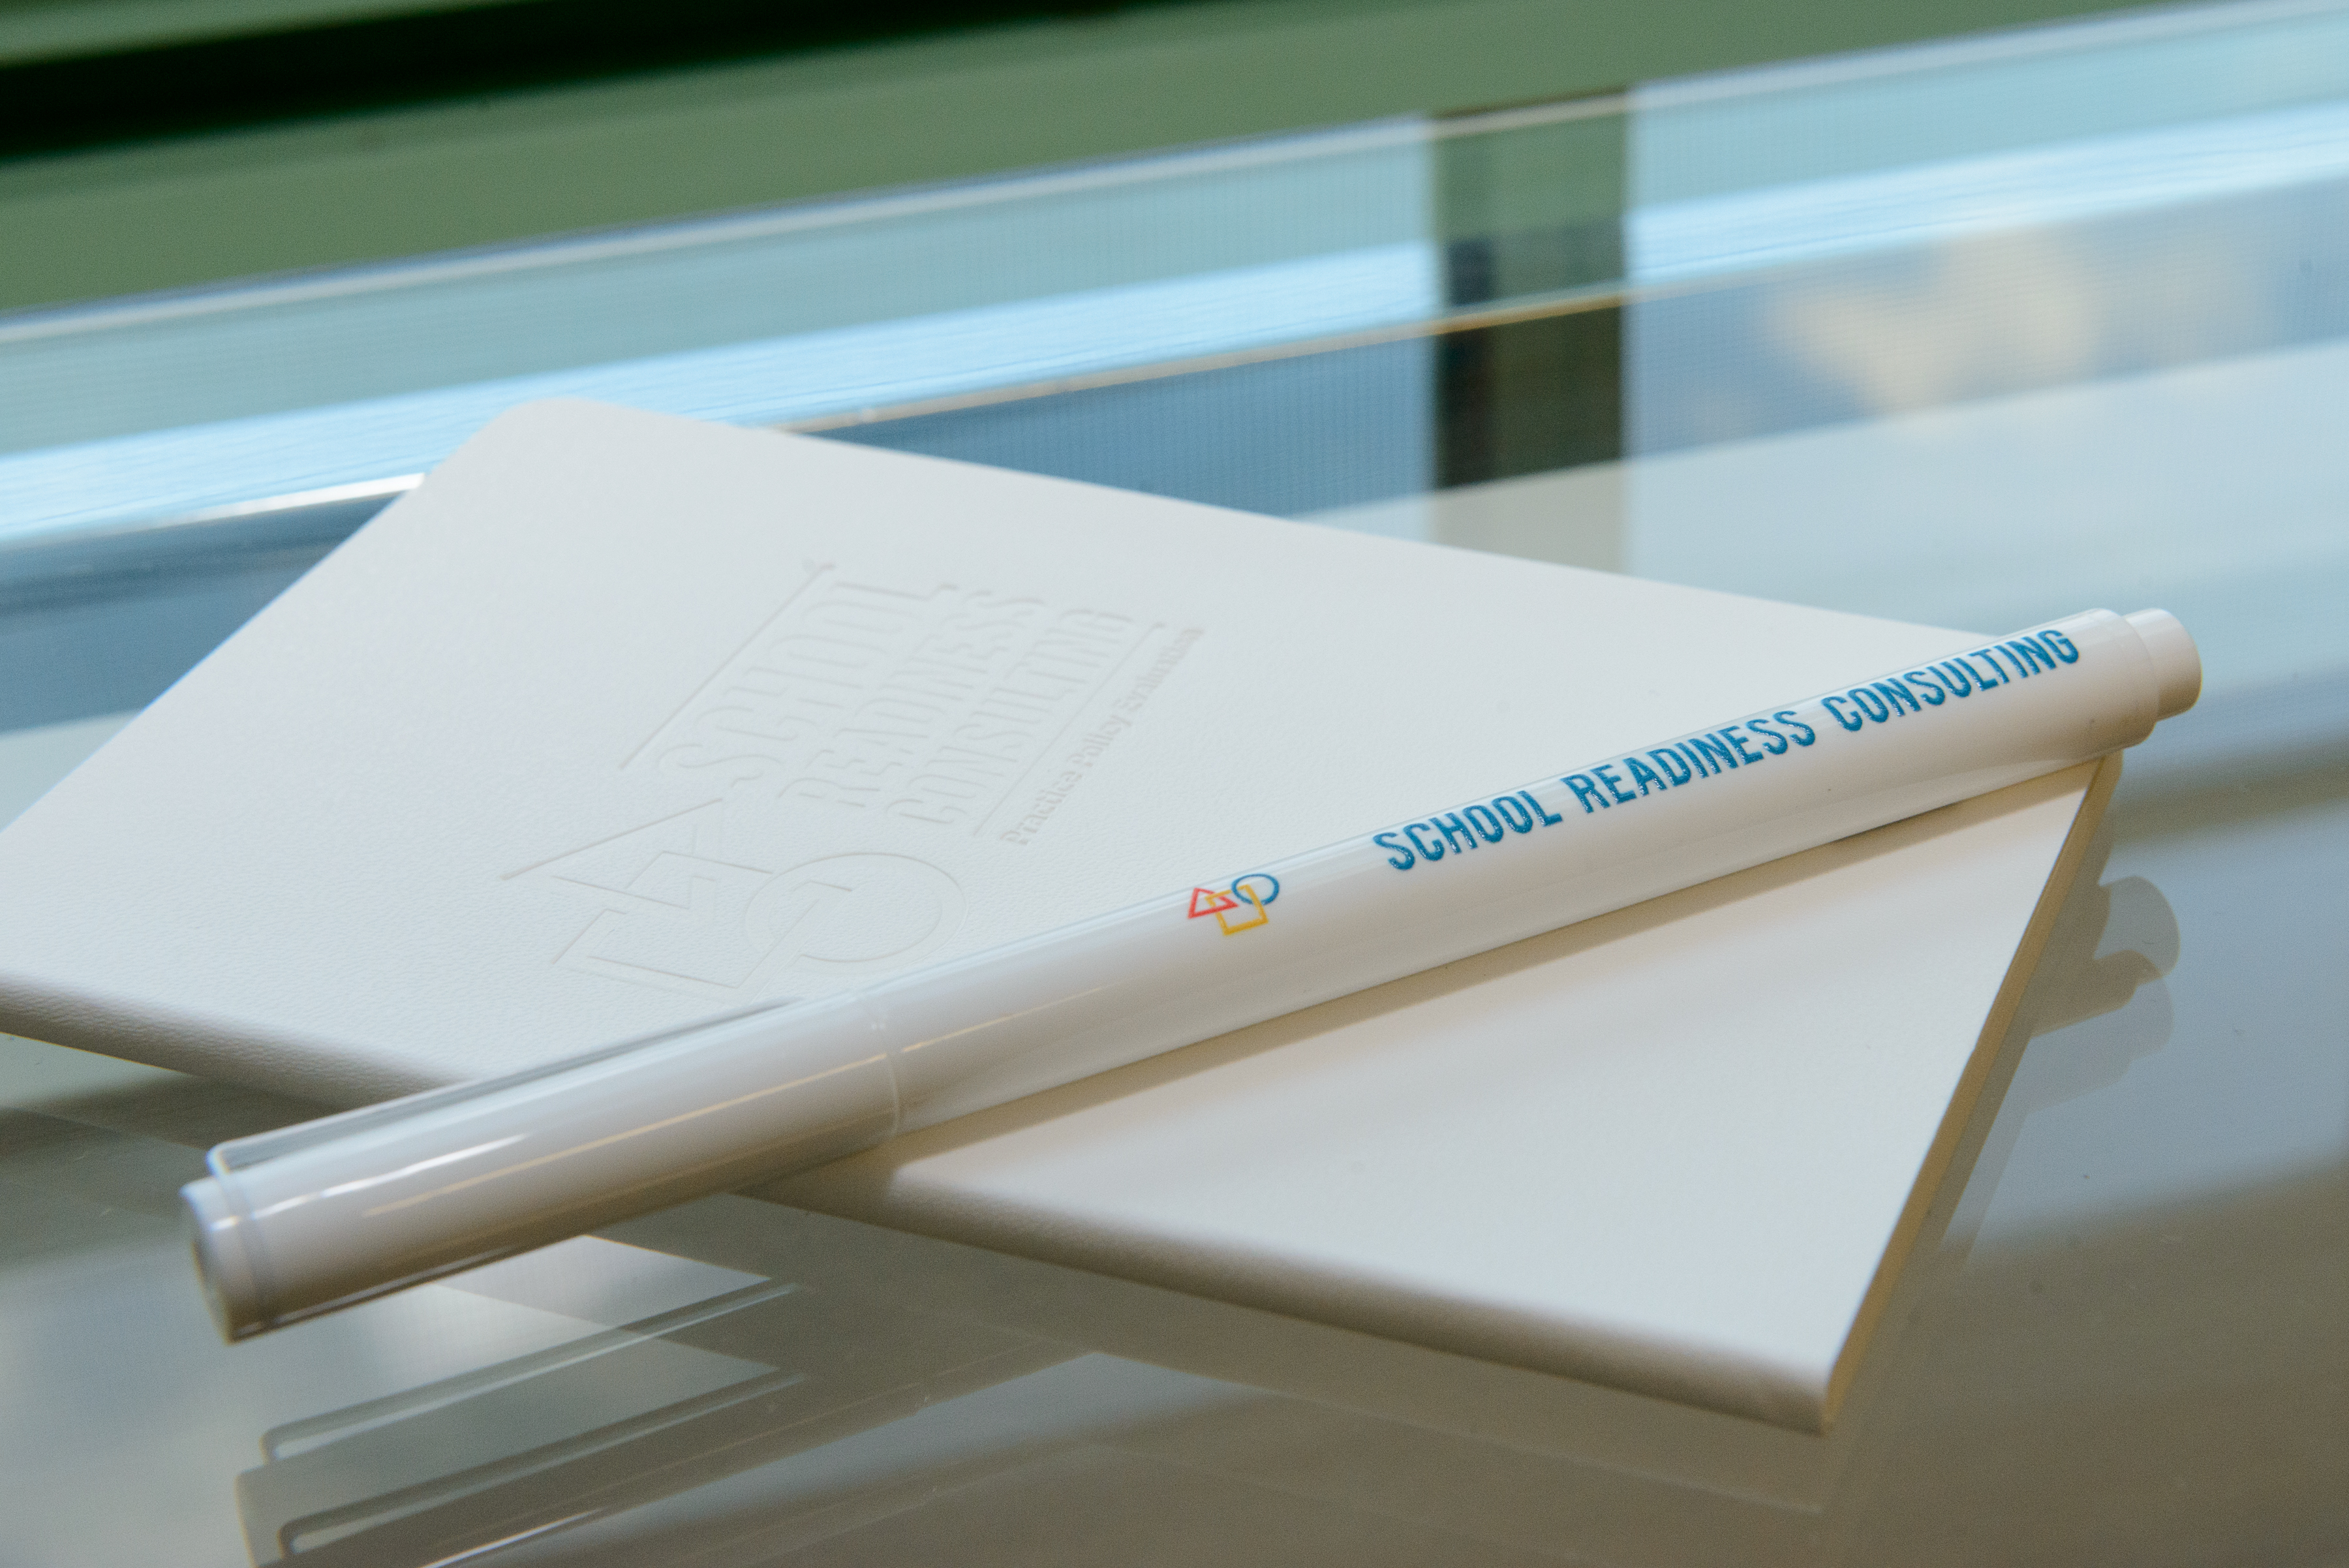 Branded Giveaways from School Readiness Consulting's Open House included branded pens and branded moleskine notebooks